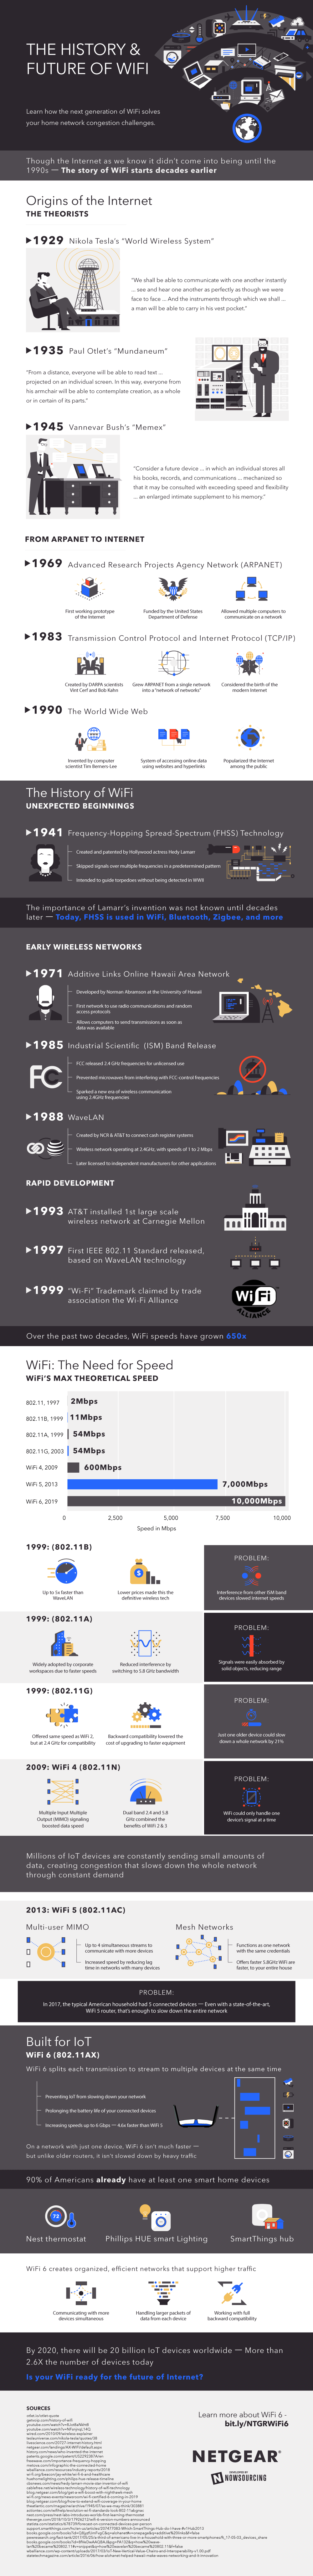 Move Over, WiFi5. WiFi6 Is Almost Here [Infographic] | DeviceDaily.com